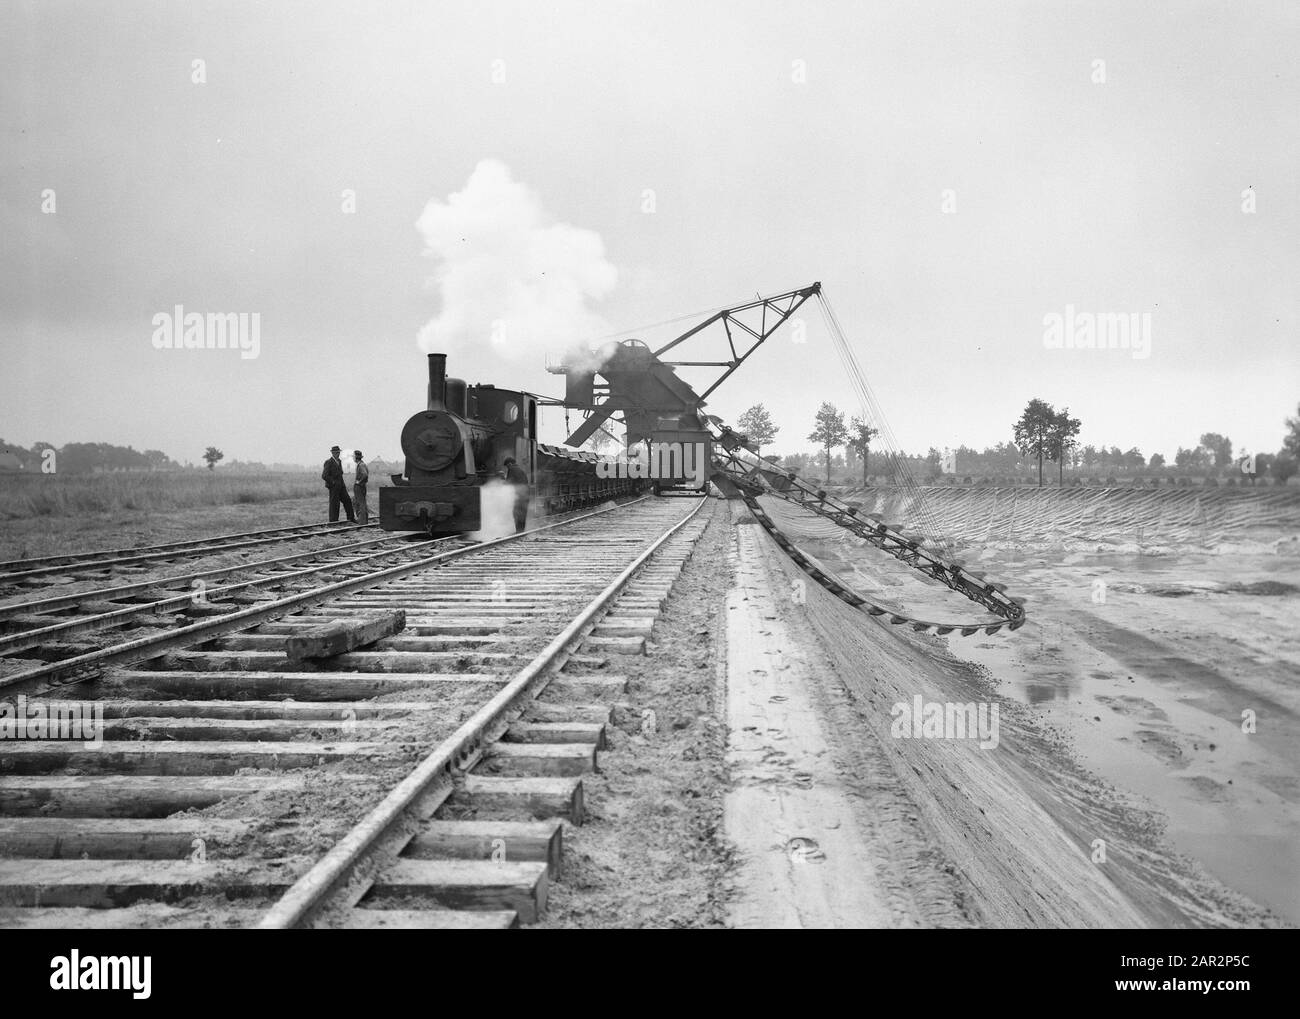 digging and improving canals, building bridges, transport, sand, steam trains, Beemden Date: undated Location: Beemden Keywords: laying bridges, graves and improve channels, steam trains, transport, sand Stock Photo